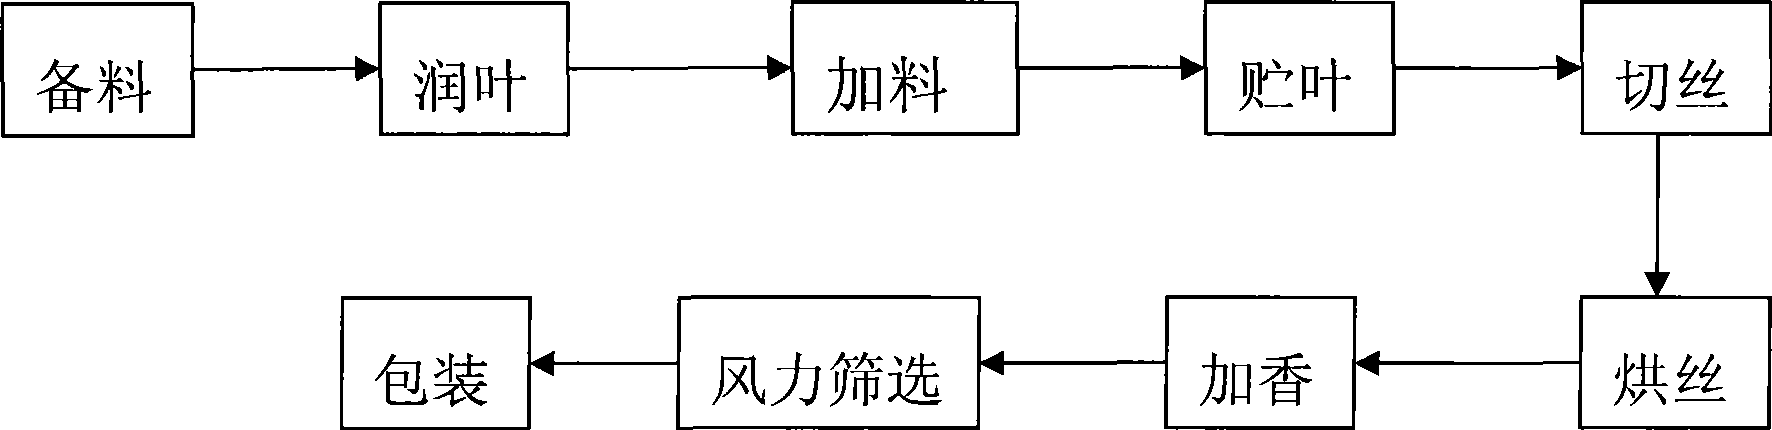 Industrialization production method of pipe tobacco